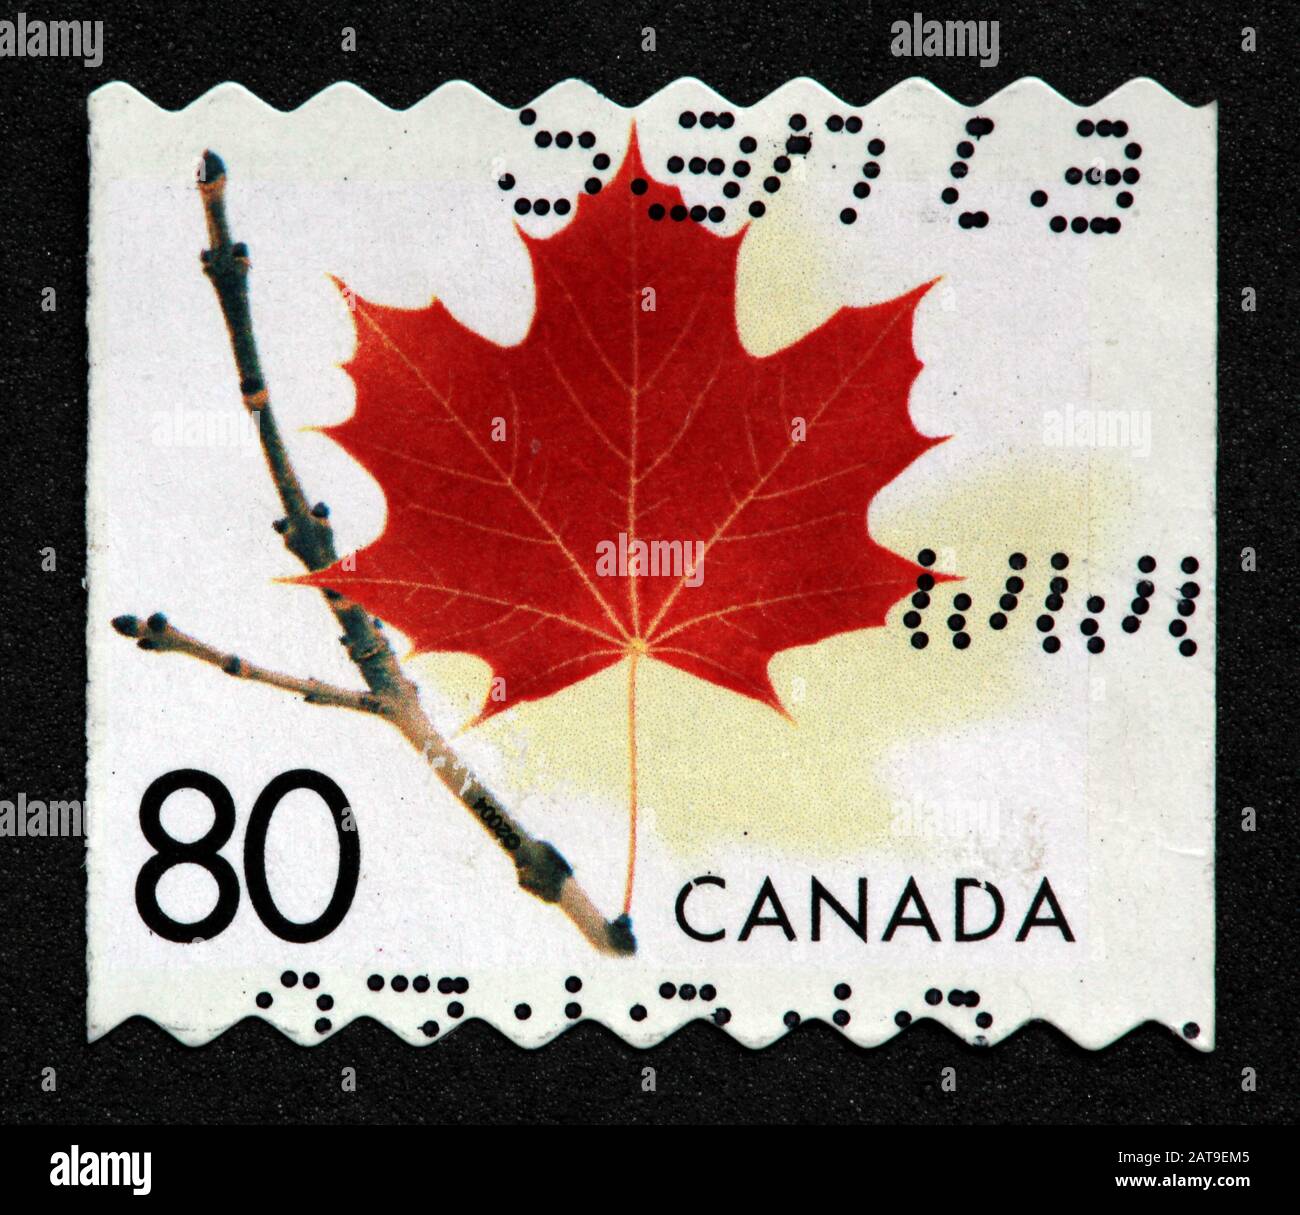 Timbro canadese, Canada Stamp, Canada Post, usato Stamp, Canada, Maple Leaf, autunno, 80c, 80cents Foto Stock